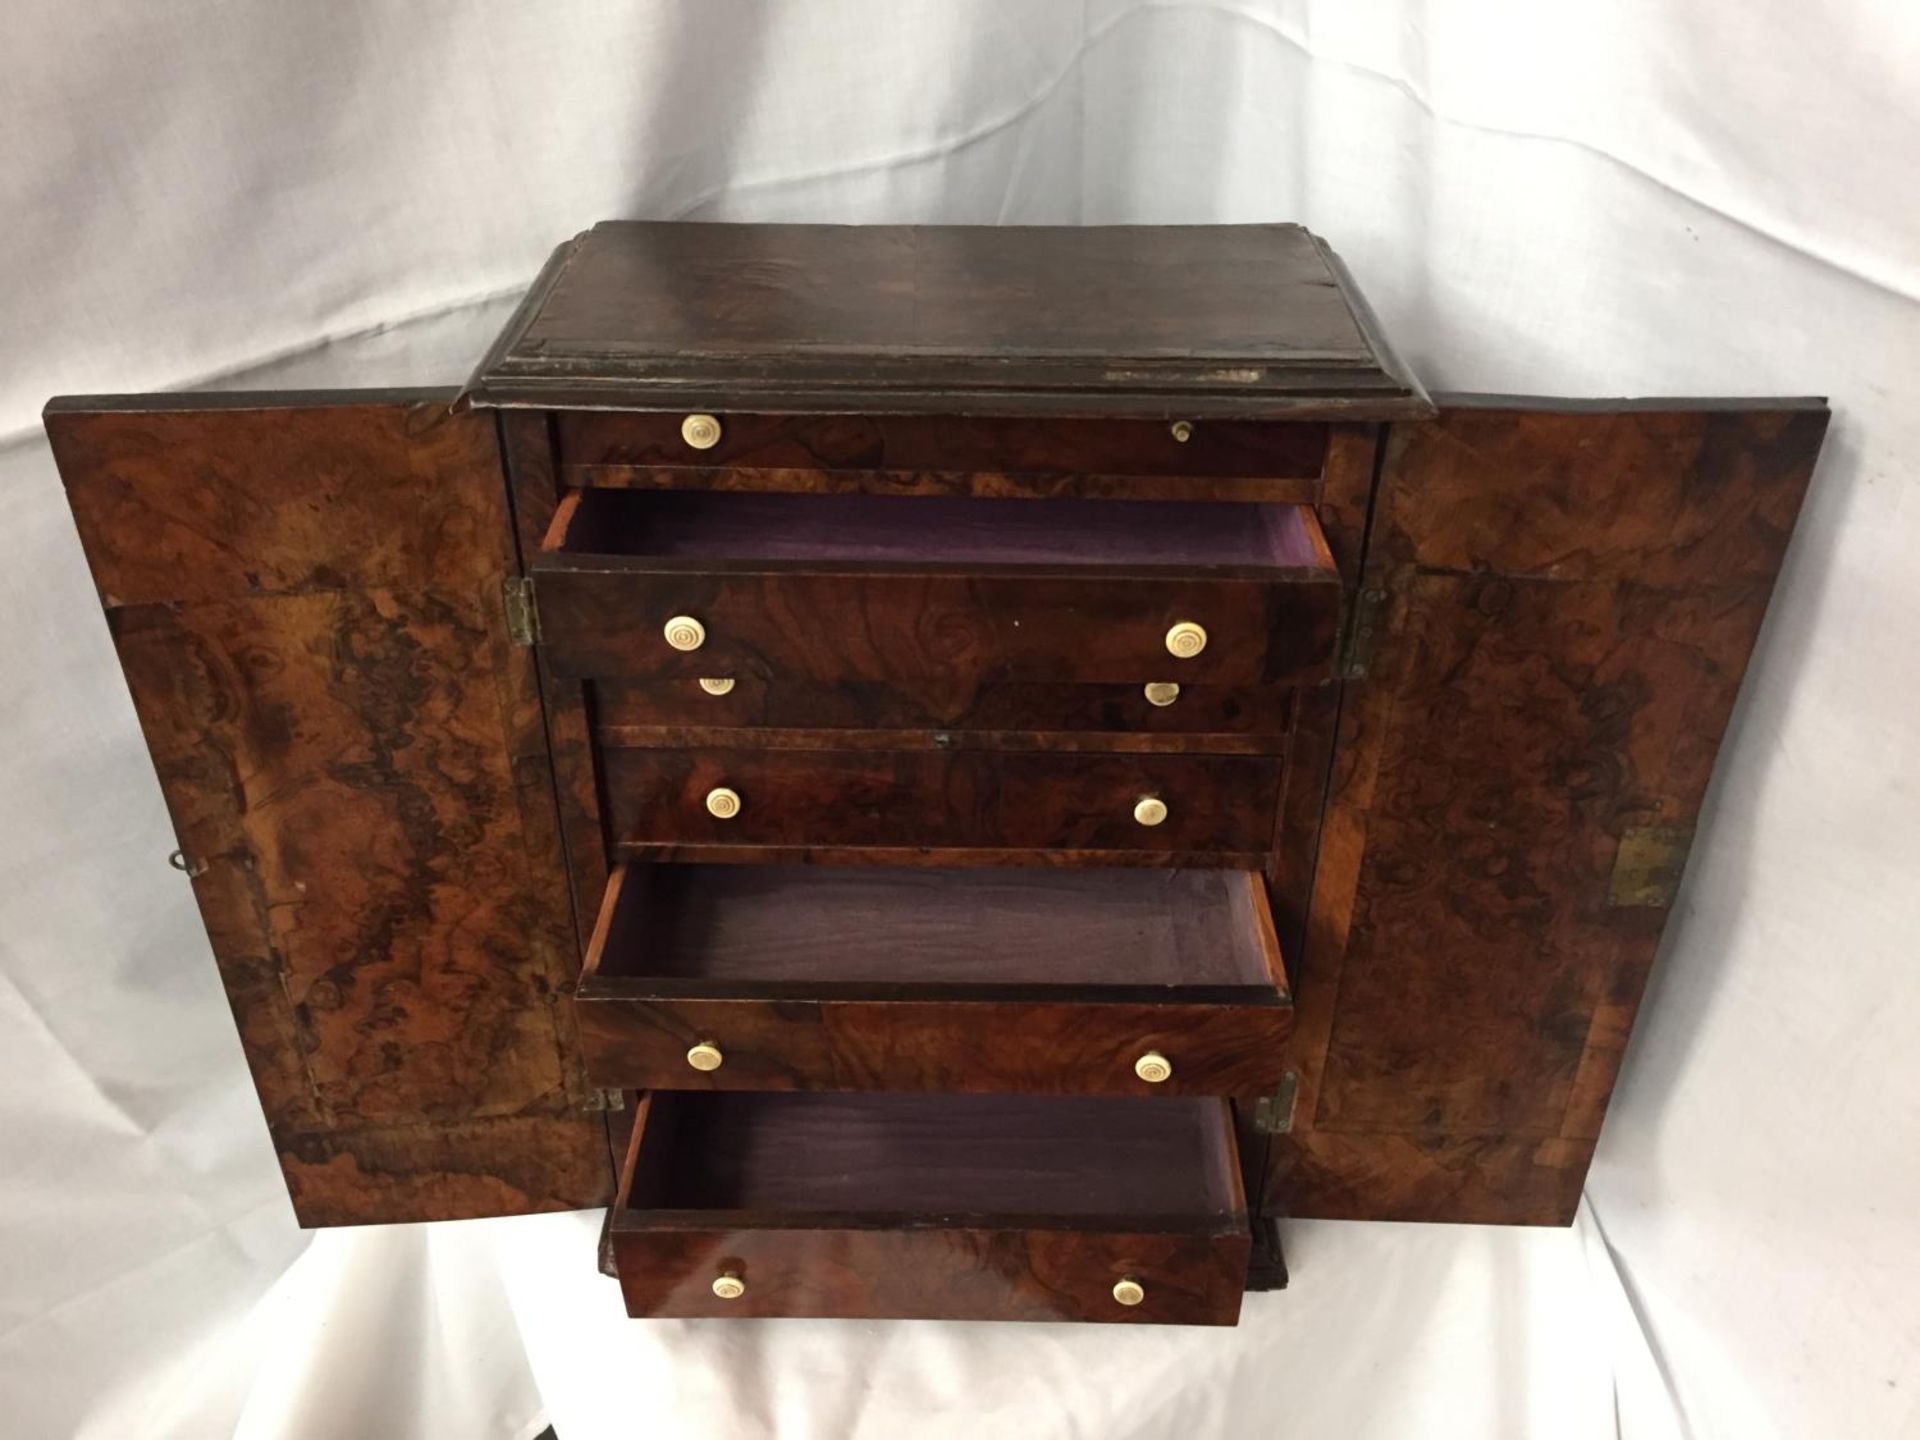 A WALNUT MINATURE CABINET TO INCORPORATE SEVEN DRAWERS 44CM HIGH POSSIBLY A WATCH MAKERS CABINET - Image 4 of 5